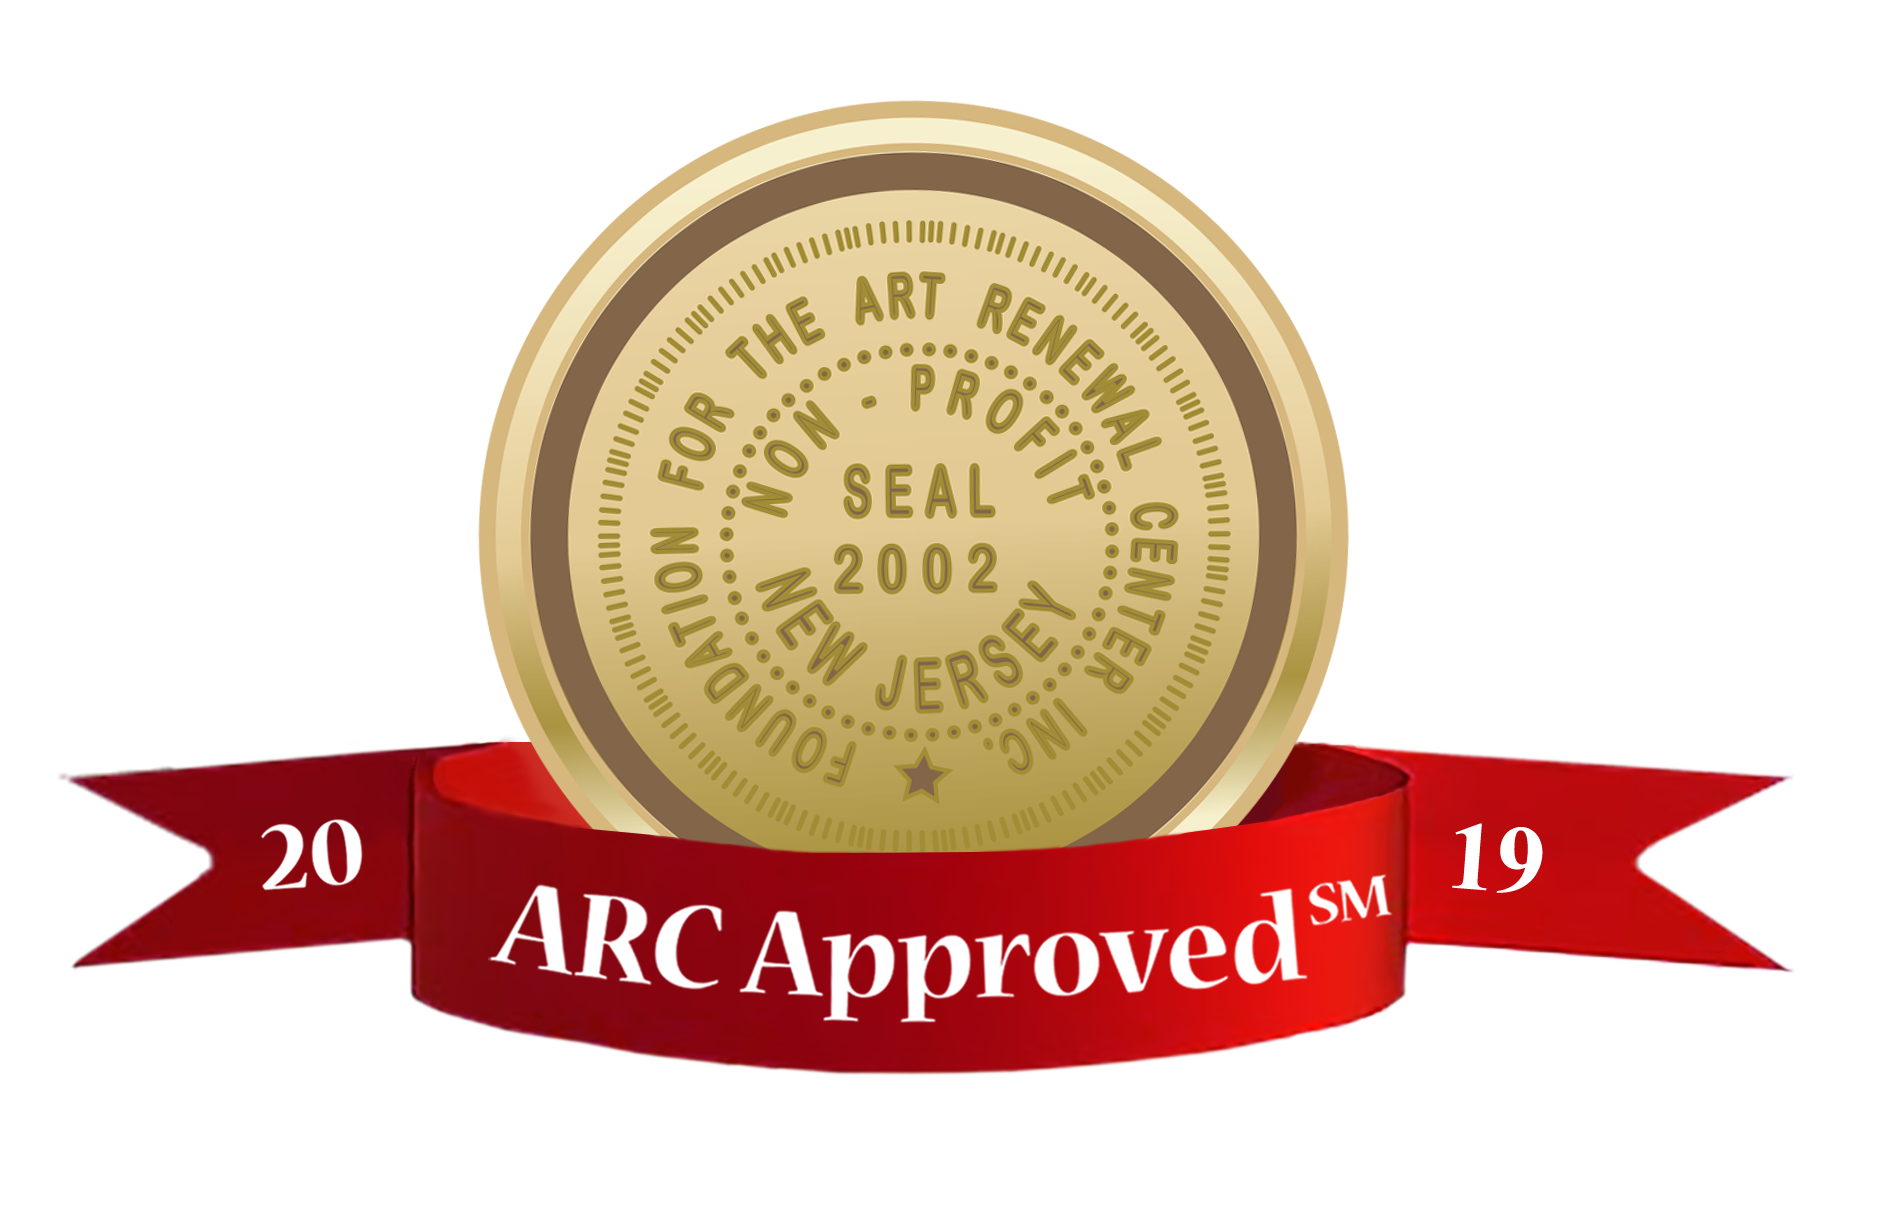 ARC Art Renewal Centre Approved Seal 2019